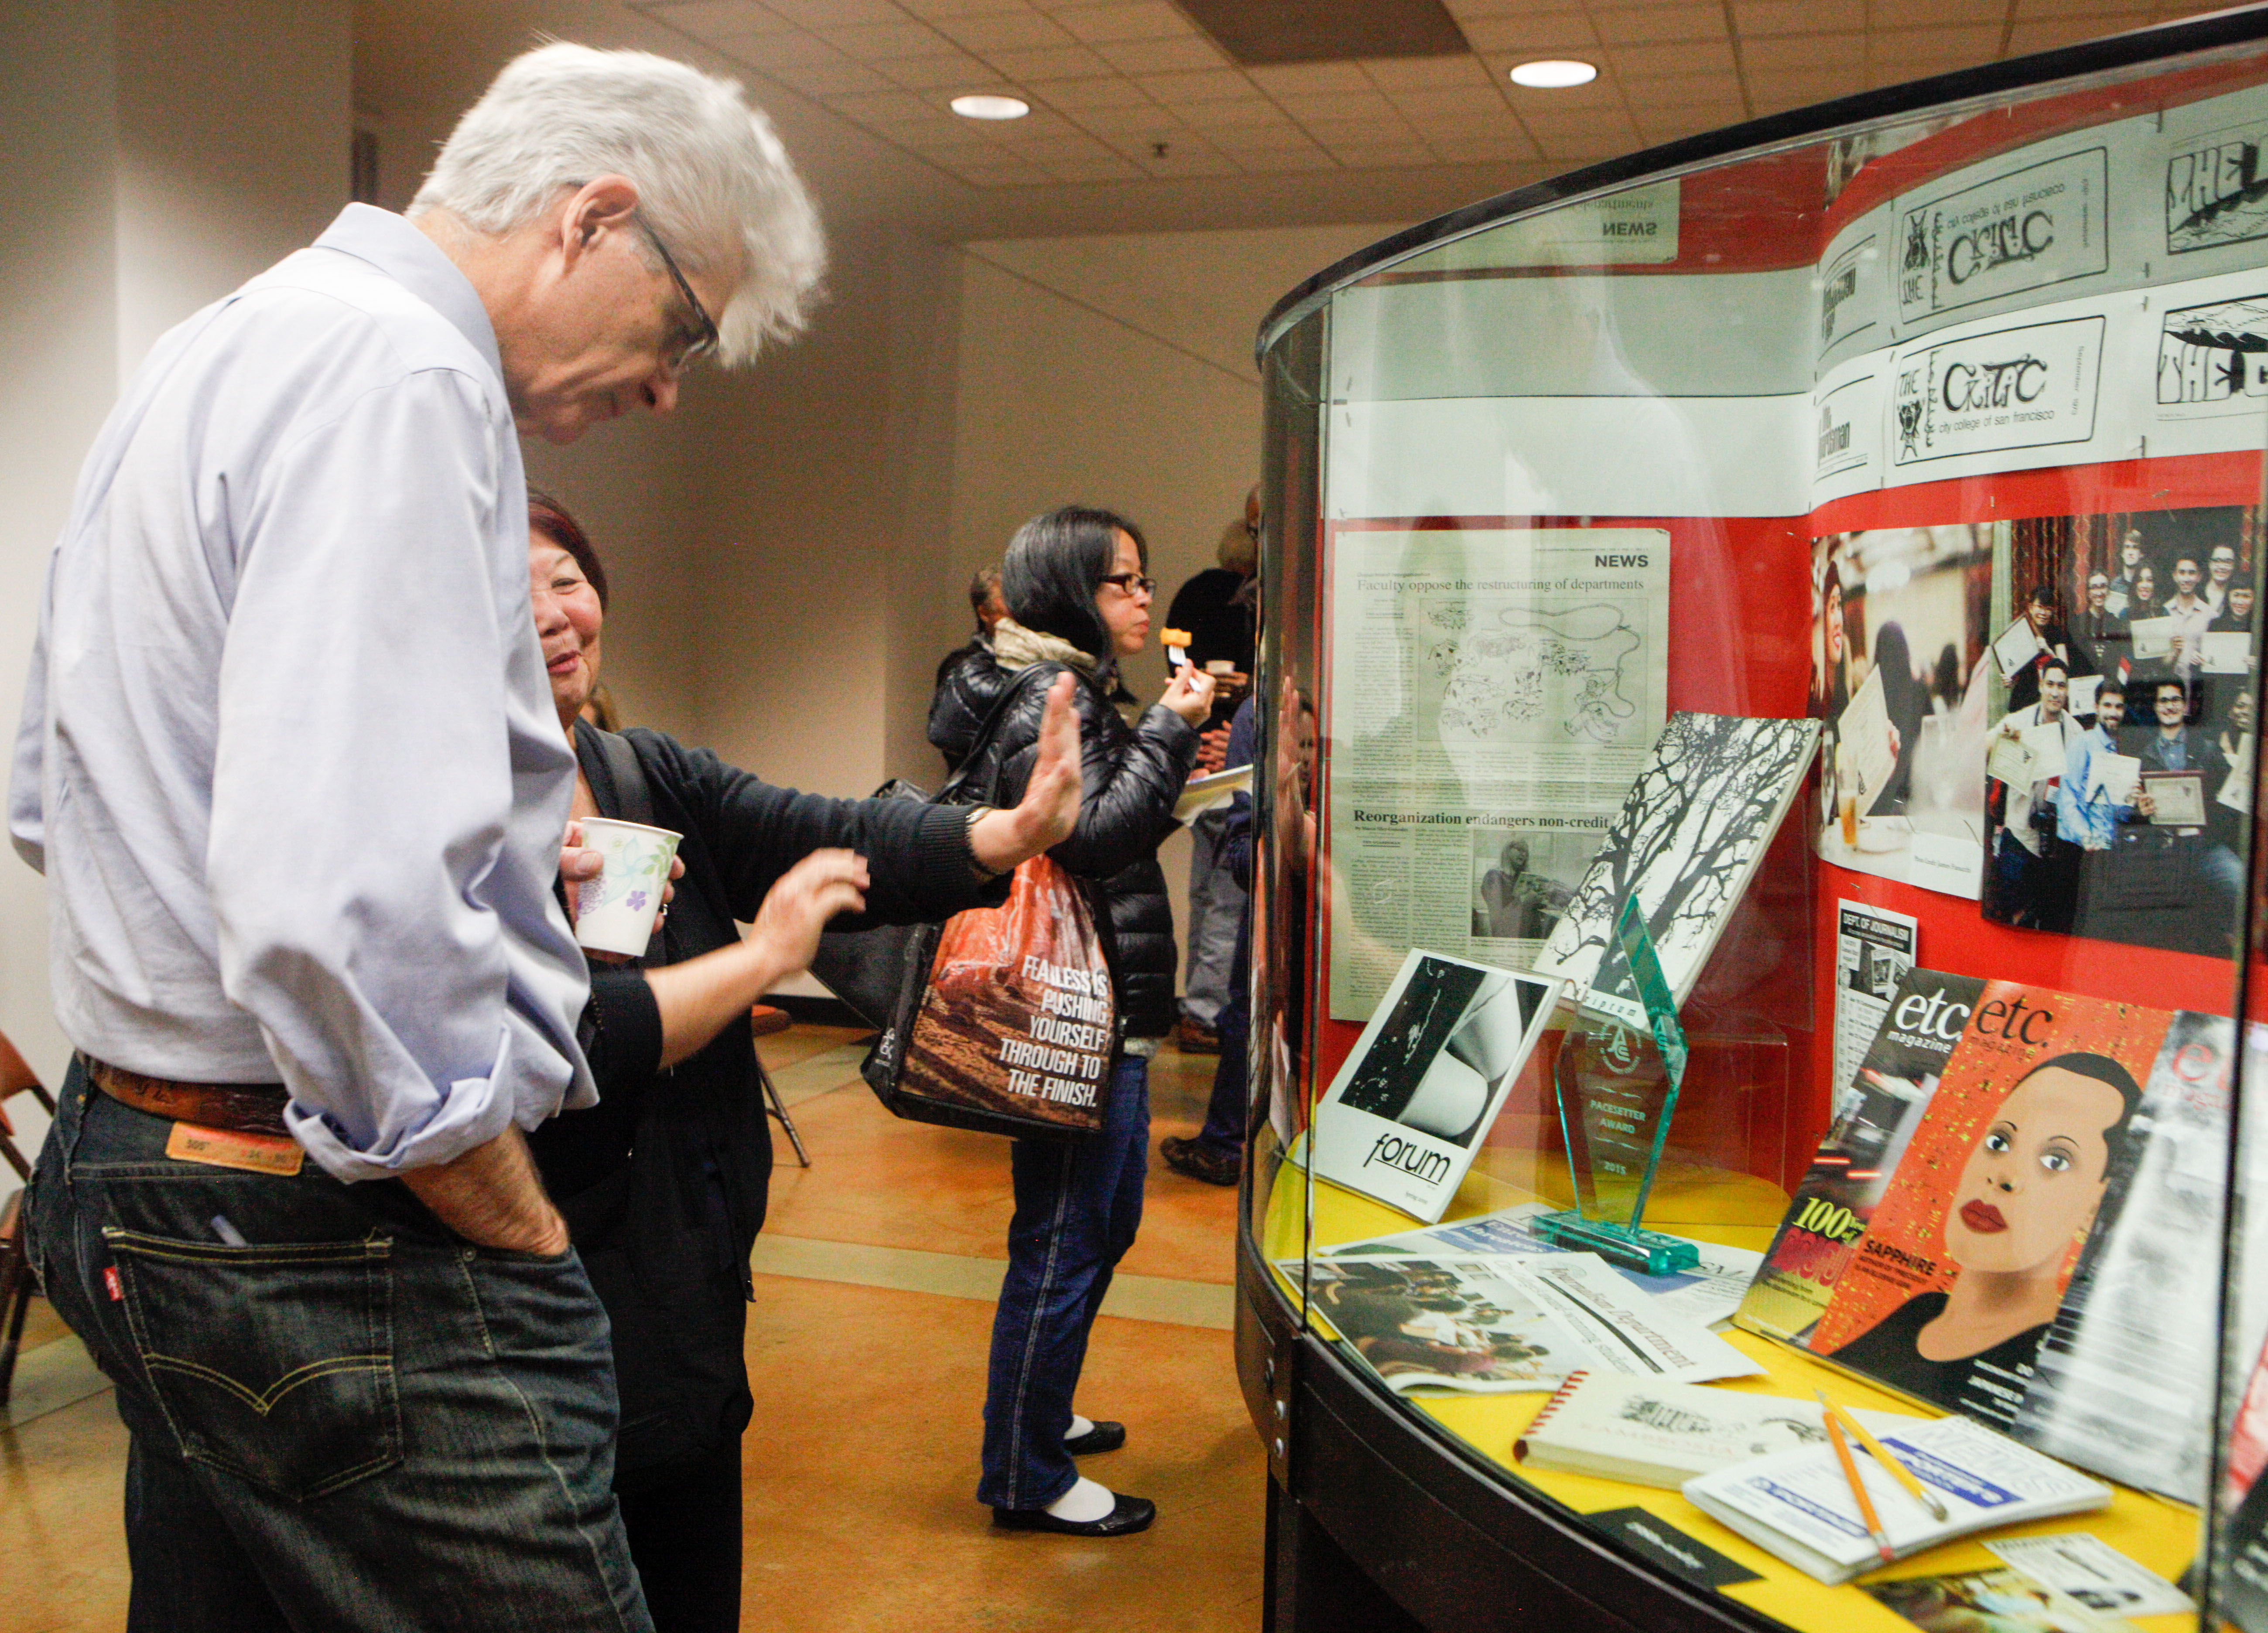 Attendees of the 80th Anniversary celebration of City College’s newspaper, The Guardsman, view photos and historical information on display in the Rosenberg Library on Thursday Nov. 12, 2015. (Photo by Fran Smith/ The Guardsman)